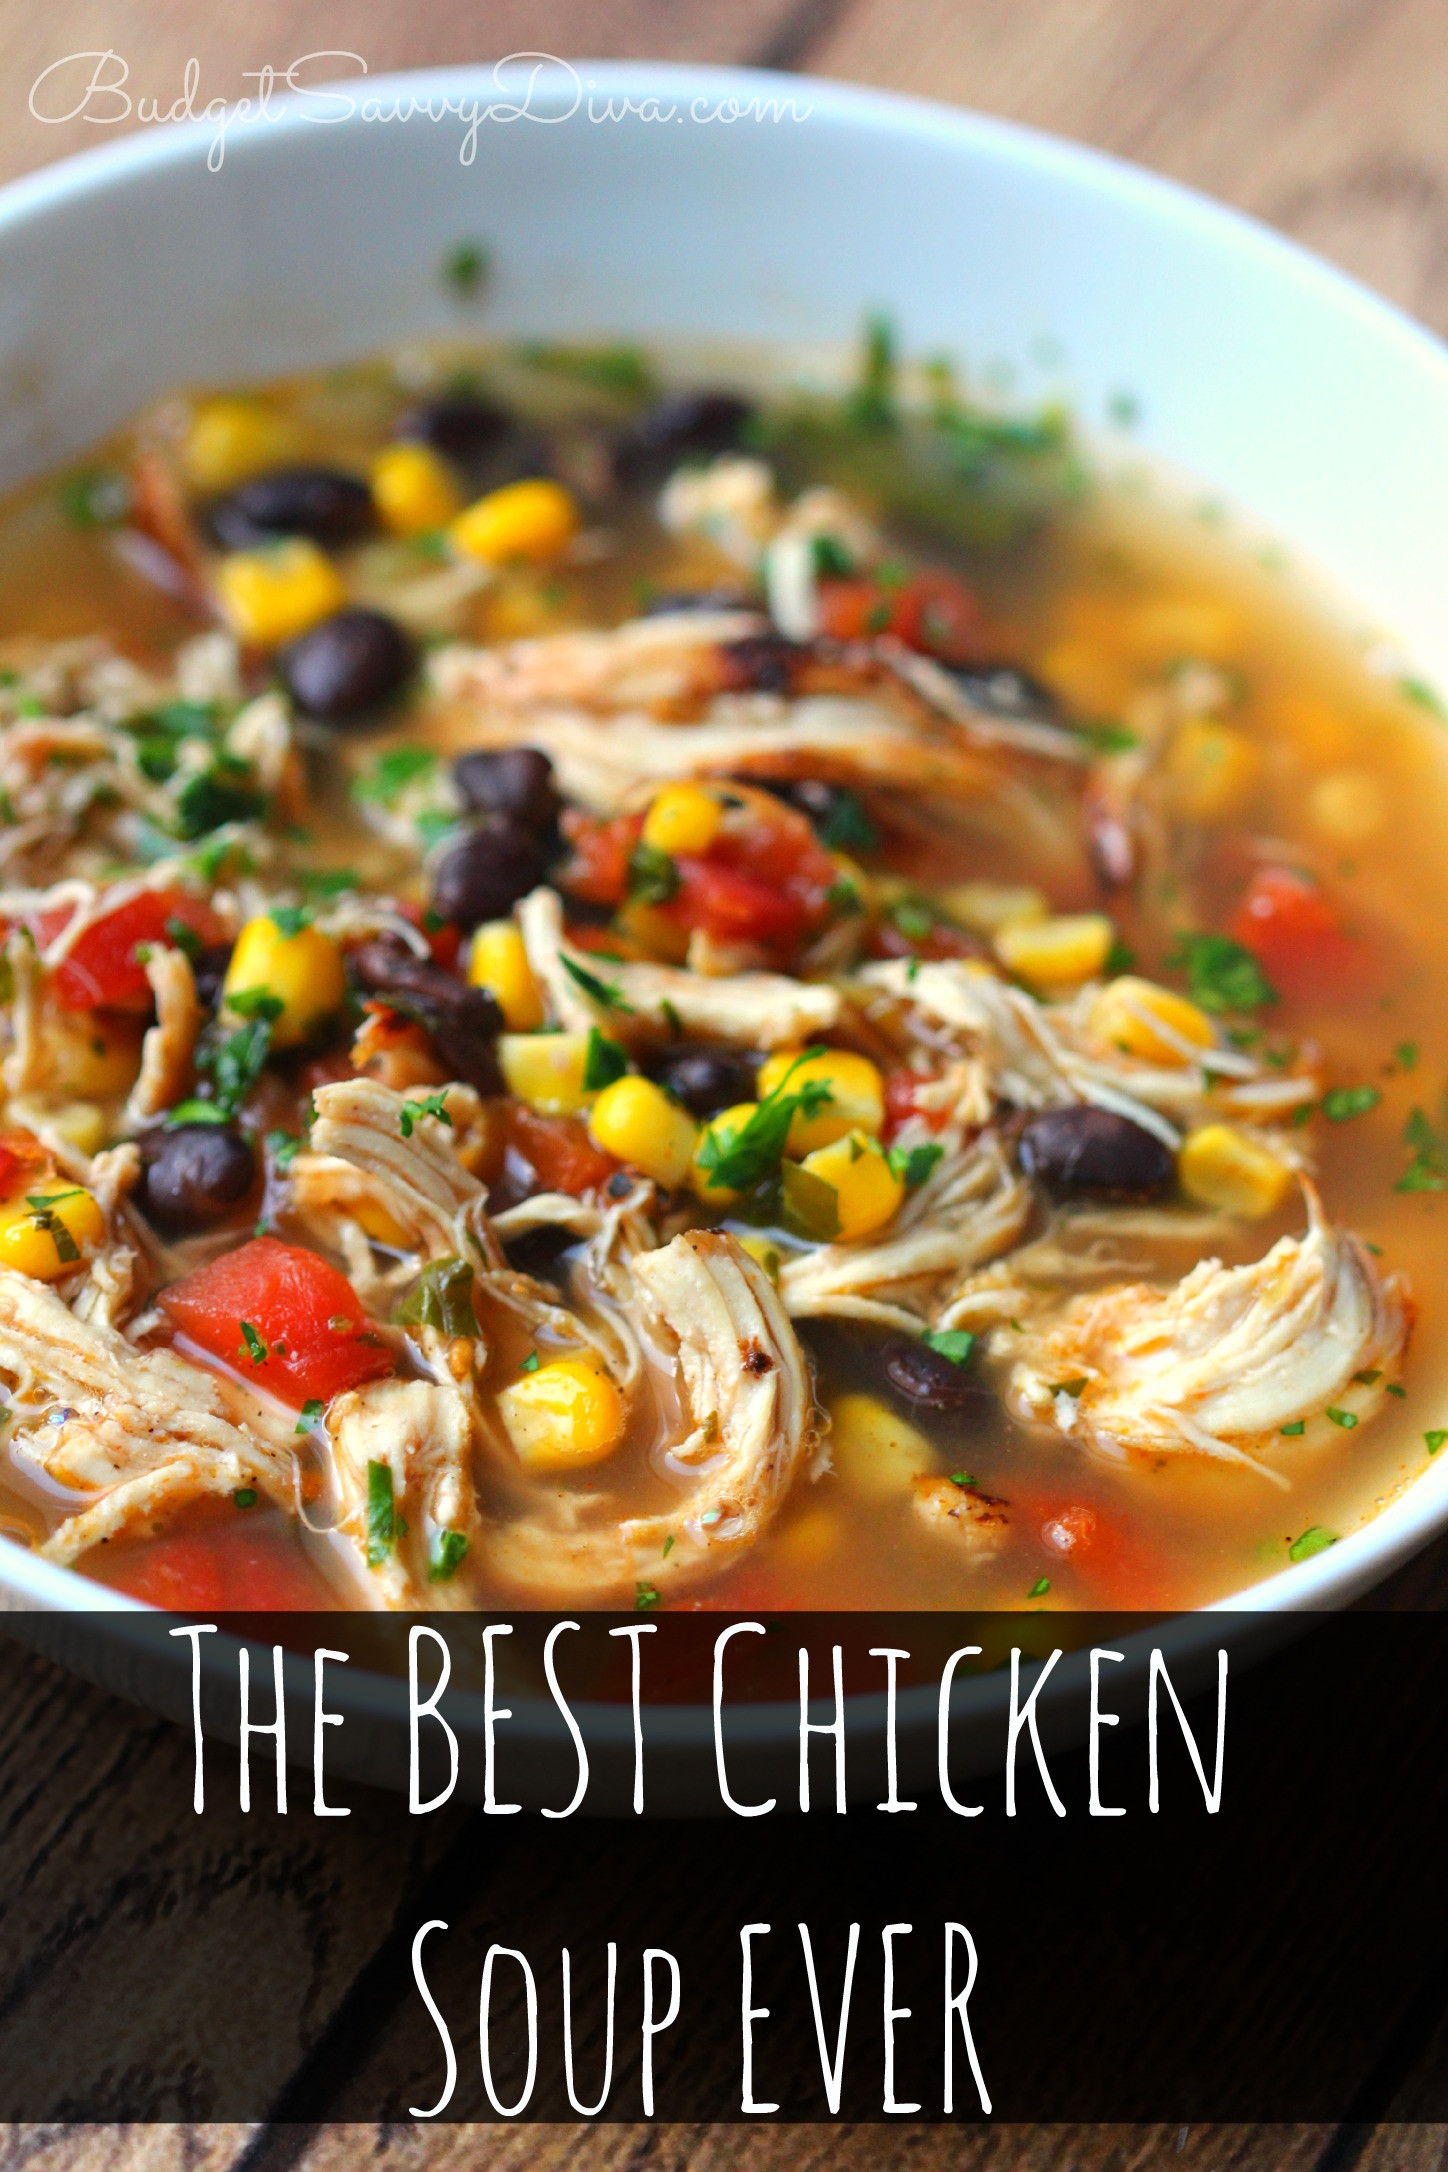 Chicken Broth Soup Recipe
 The BEST Chicken Soup Ever Recipe